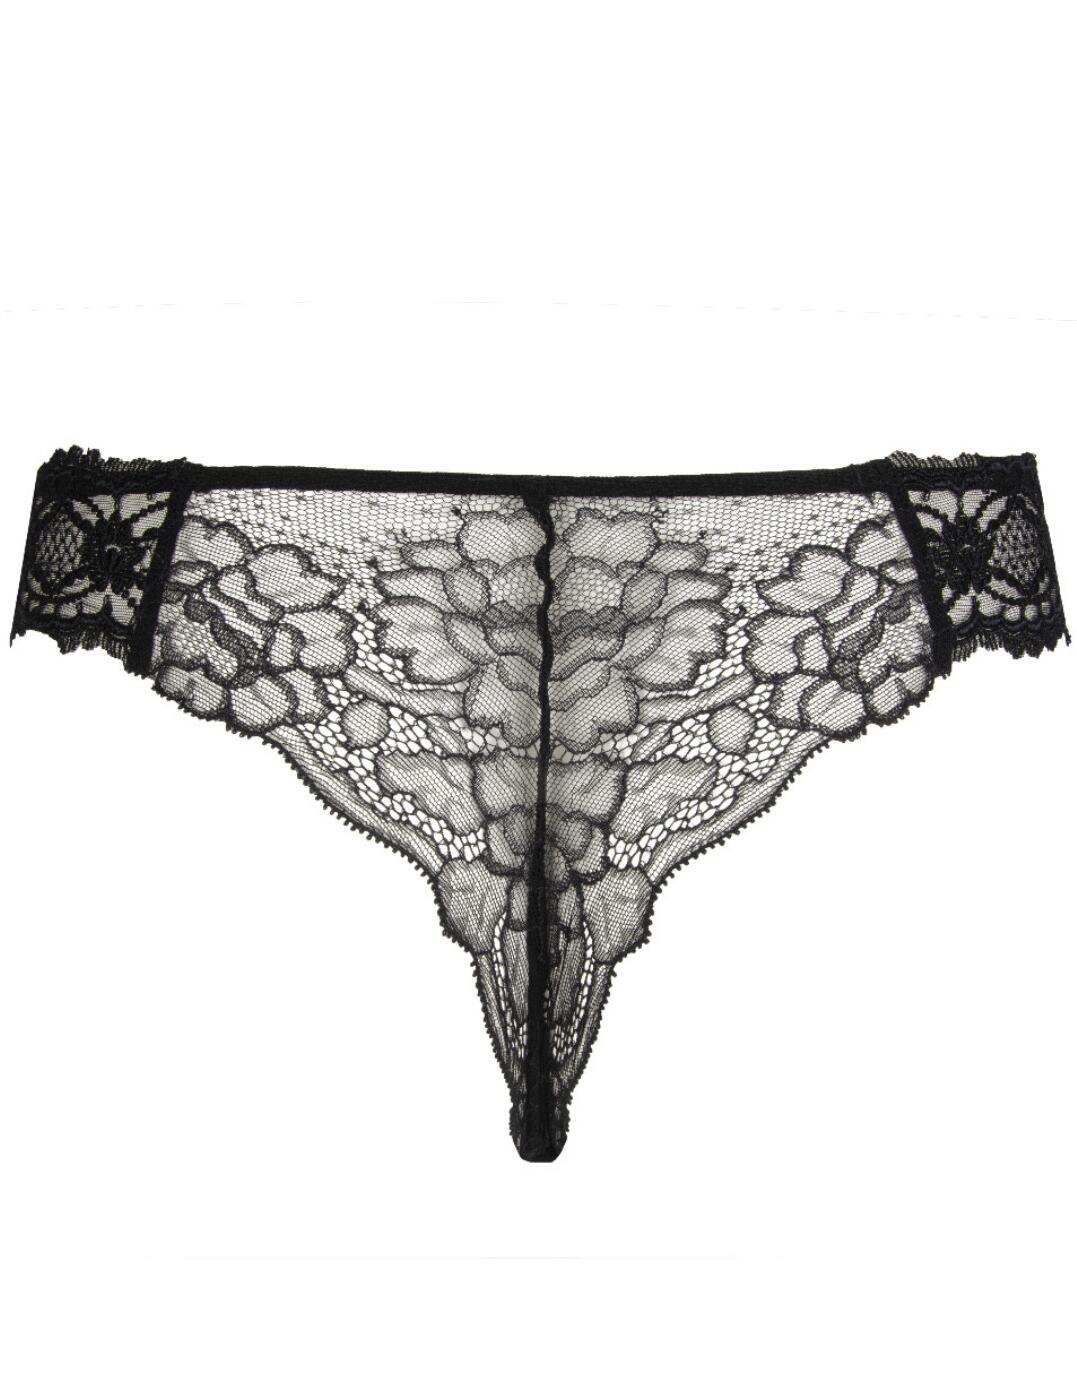 Luxury Lace Thong in Black and Off-White